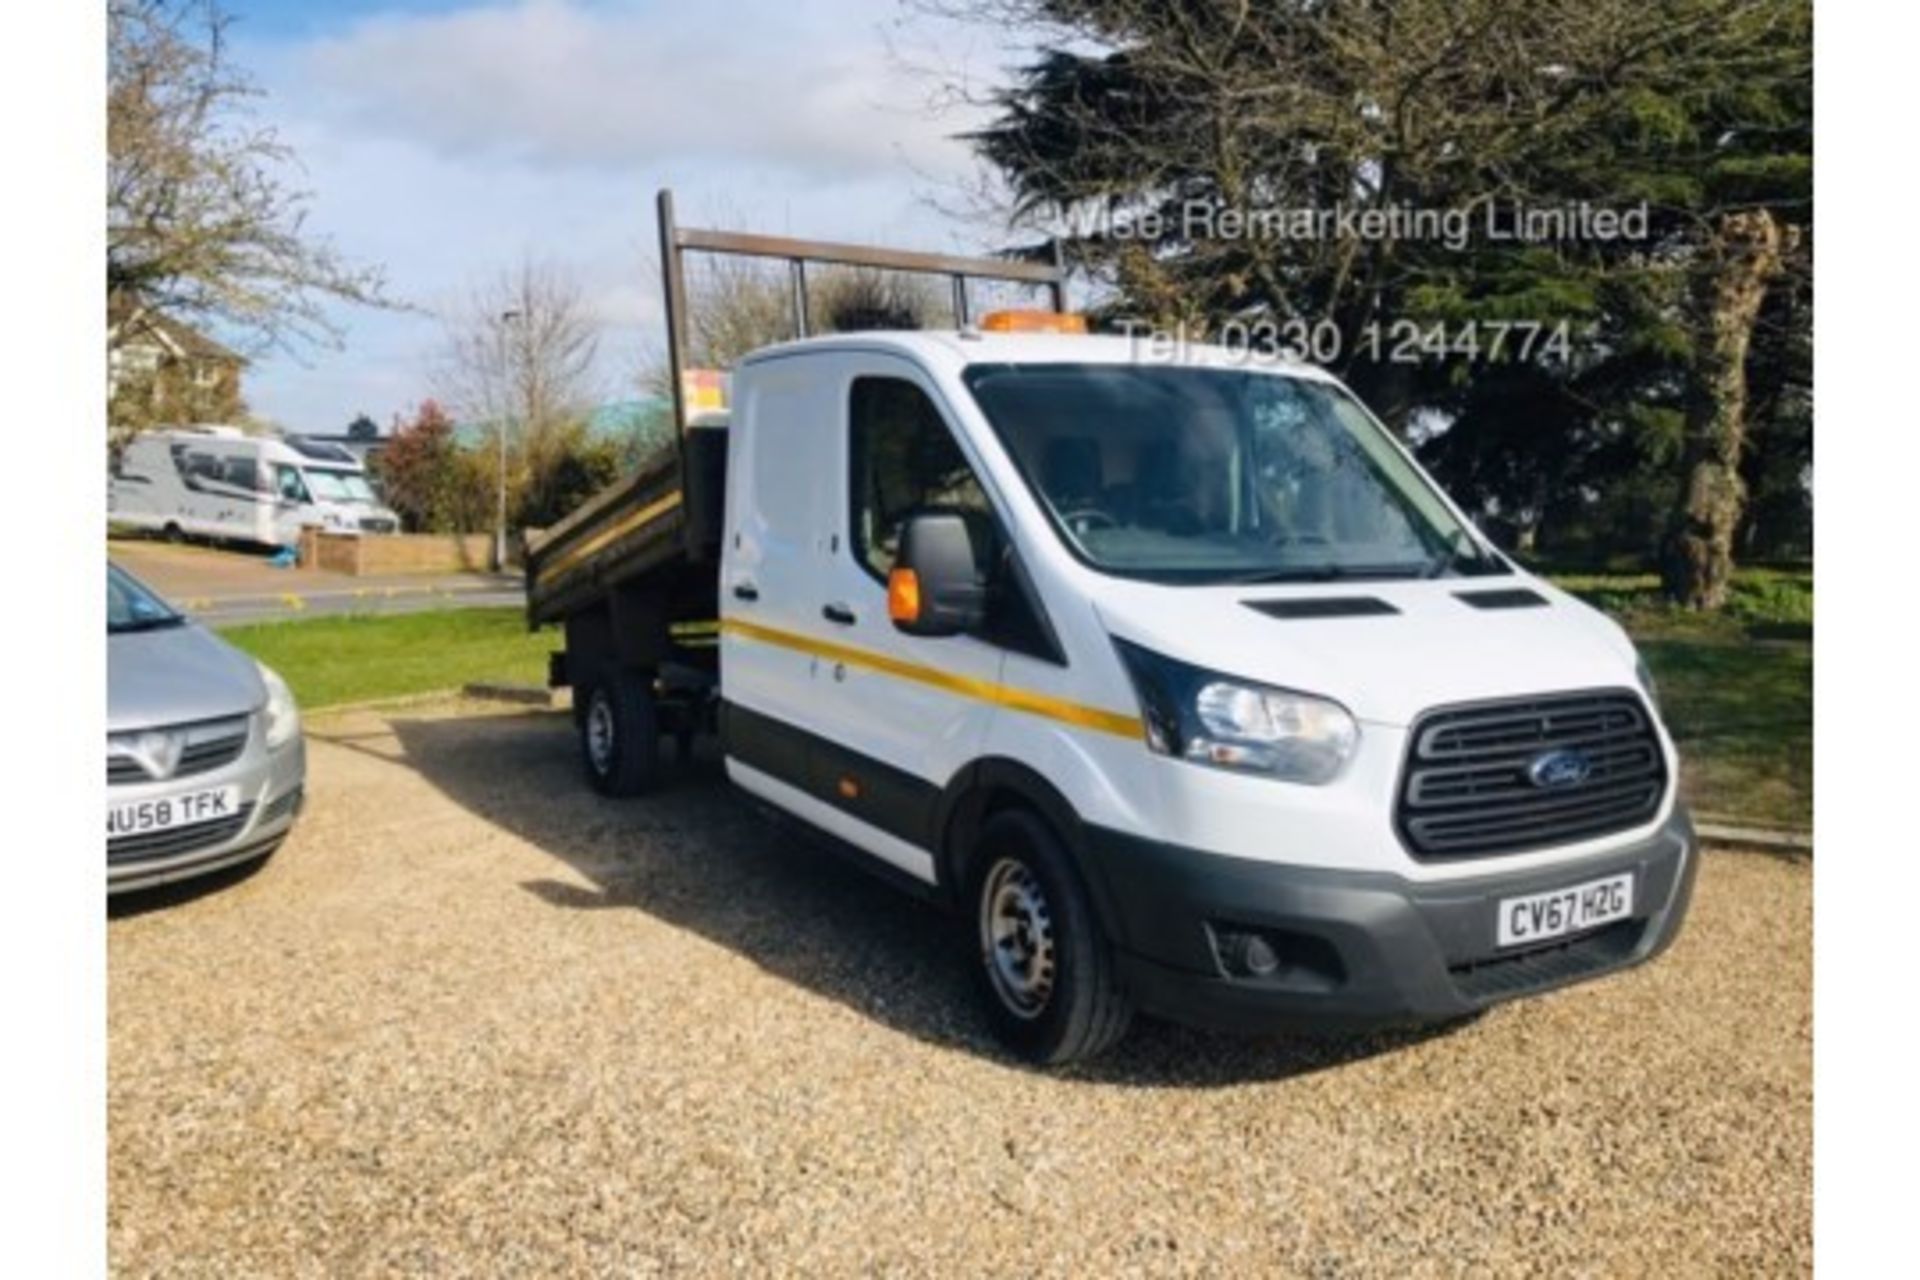 Ford Transit 350 2.0 TDCI Double Cab Tipper 2018 Model - 1 Owner From New